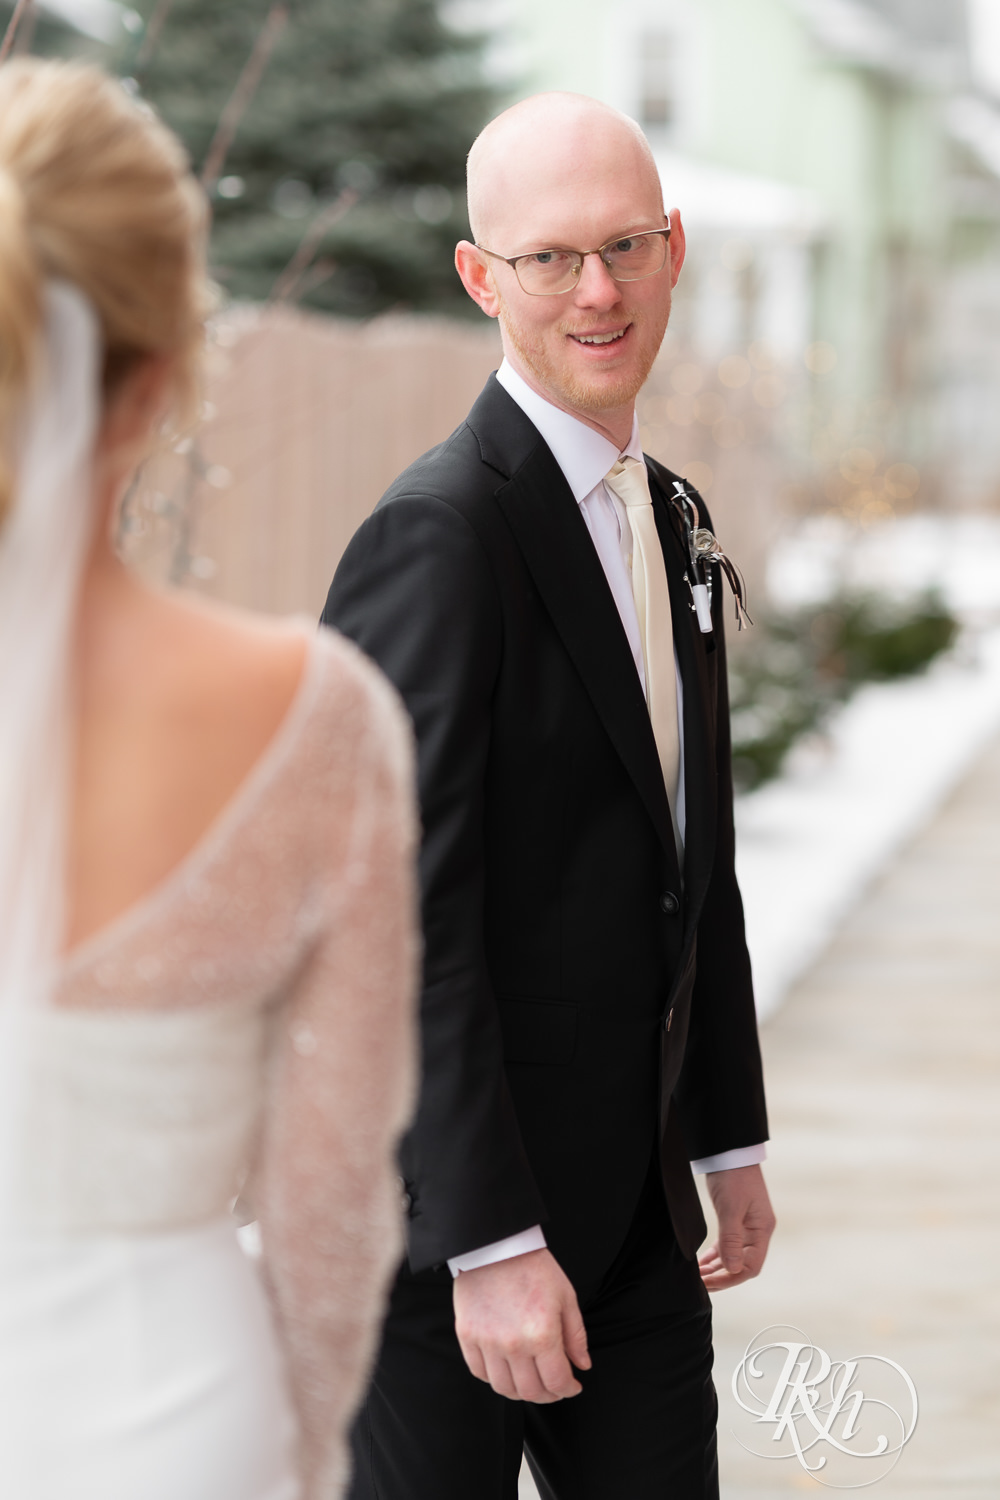 Bride and groom do first look during winter wedding at Gatherings at Station 10 in Saint Paul, Minnesota.